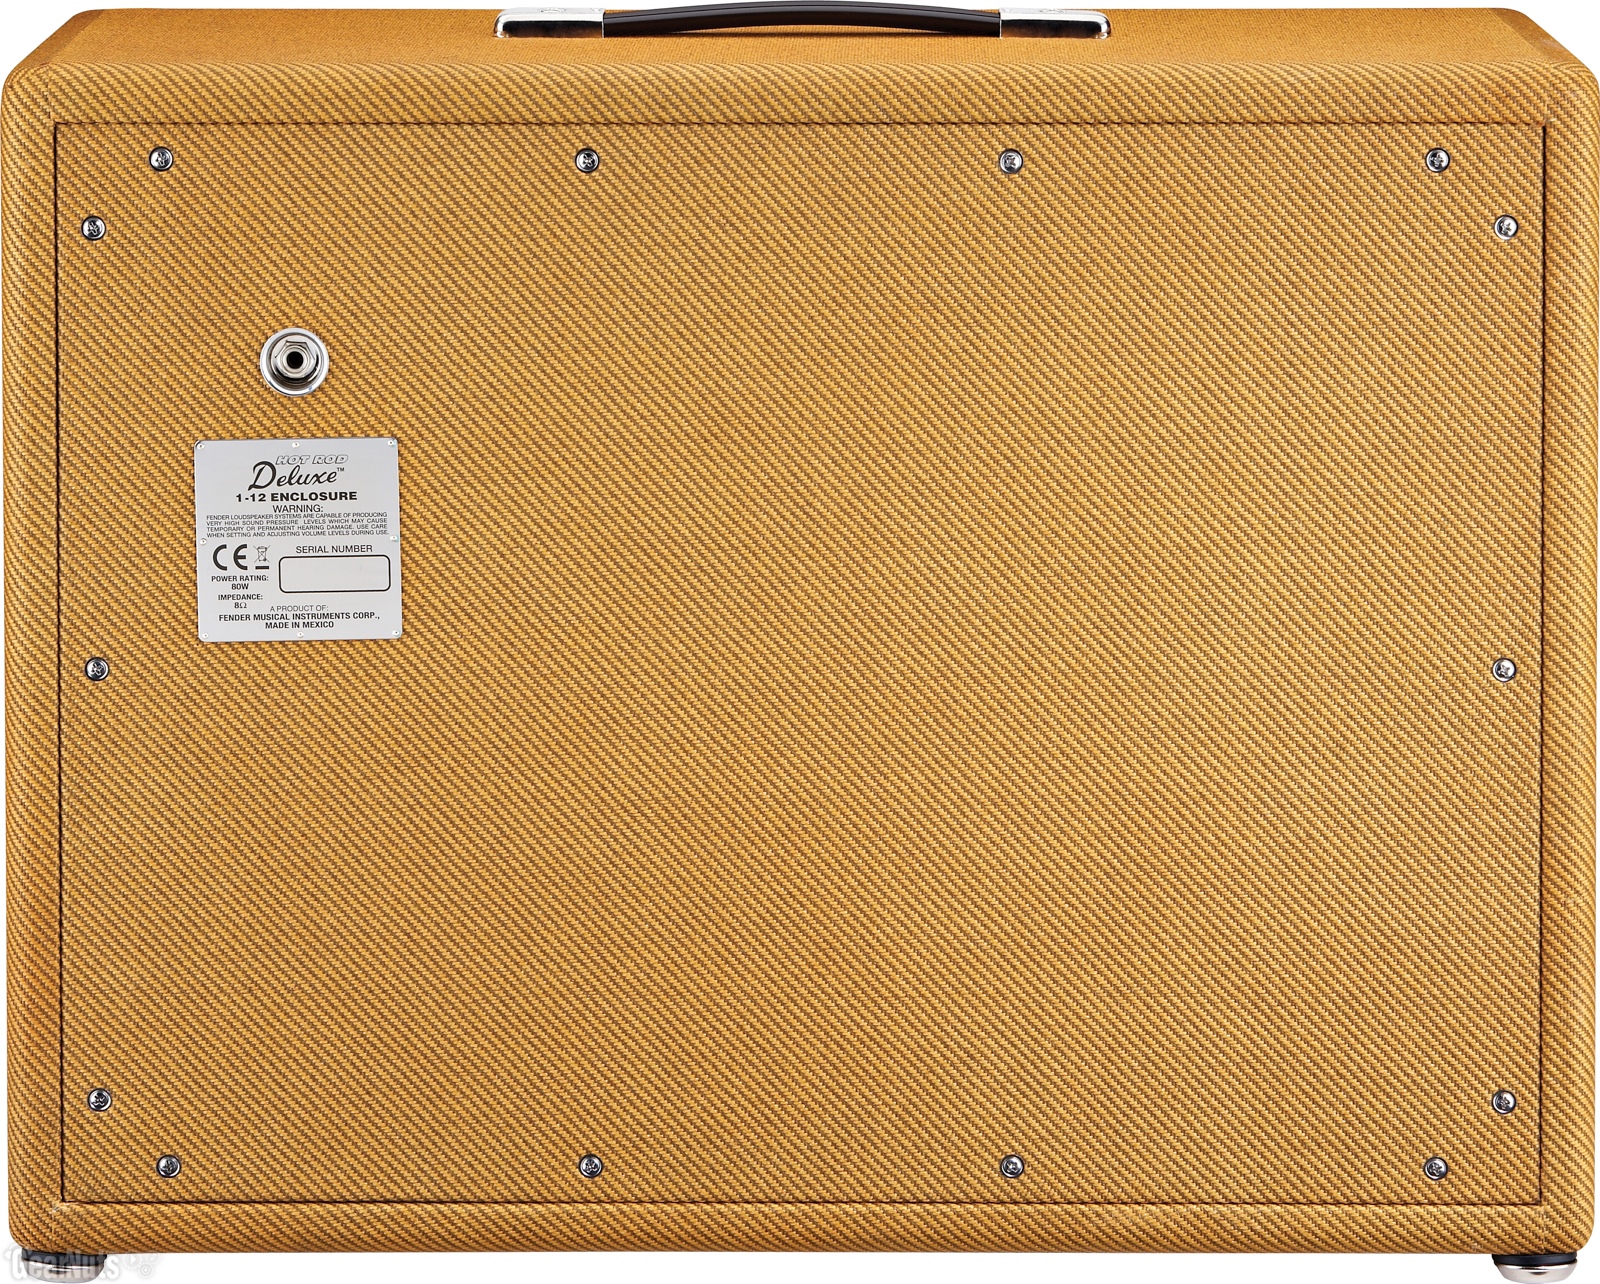 Fender Hot Rod Deluxe 112 80w 1x12 Lacquered Tweed - Electric guitar amp cabinet - Variation 1